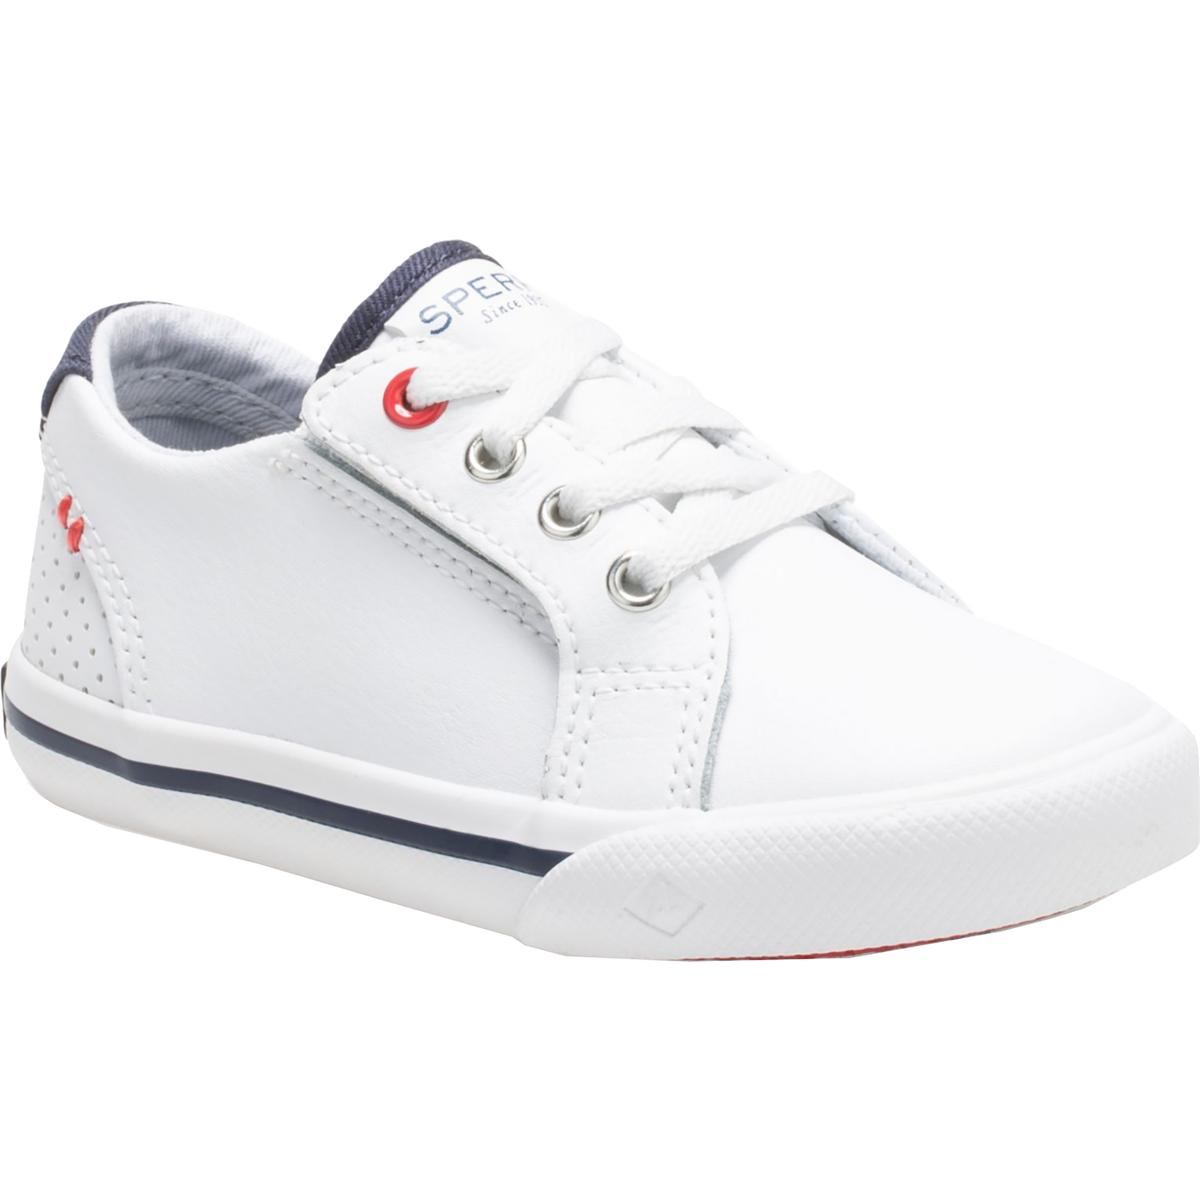 Sperry Striper II Boys Little Kid Athleisure Athletic Shoes